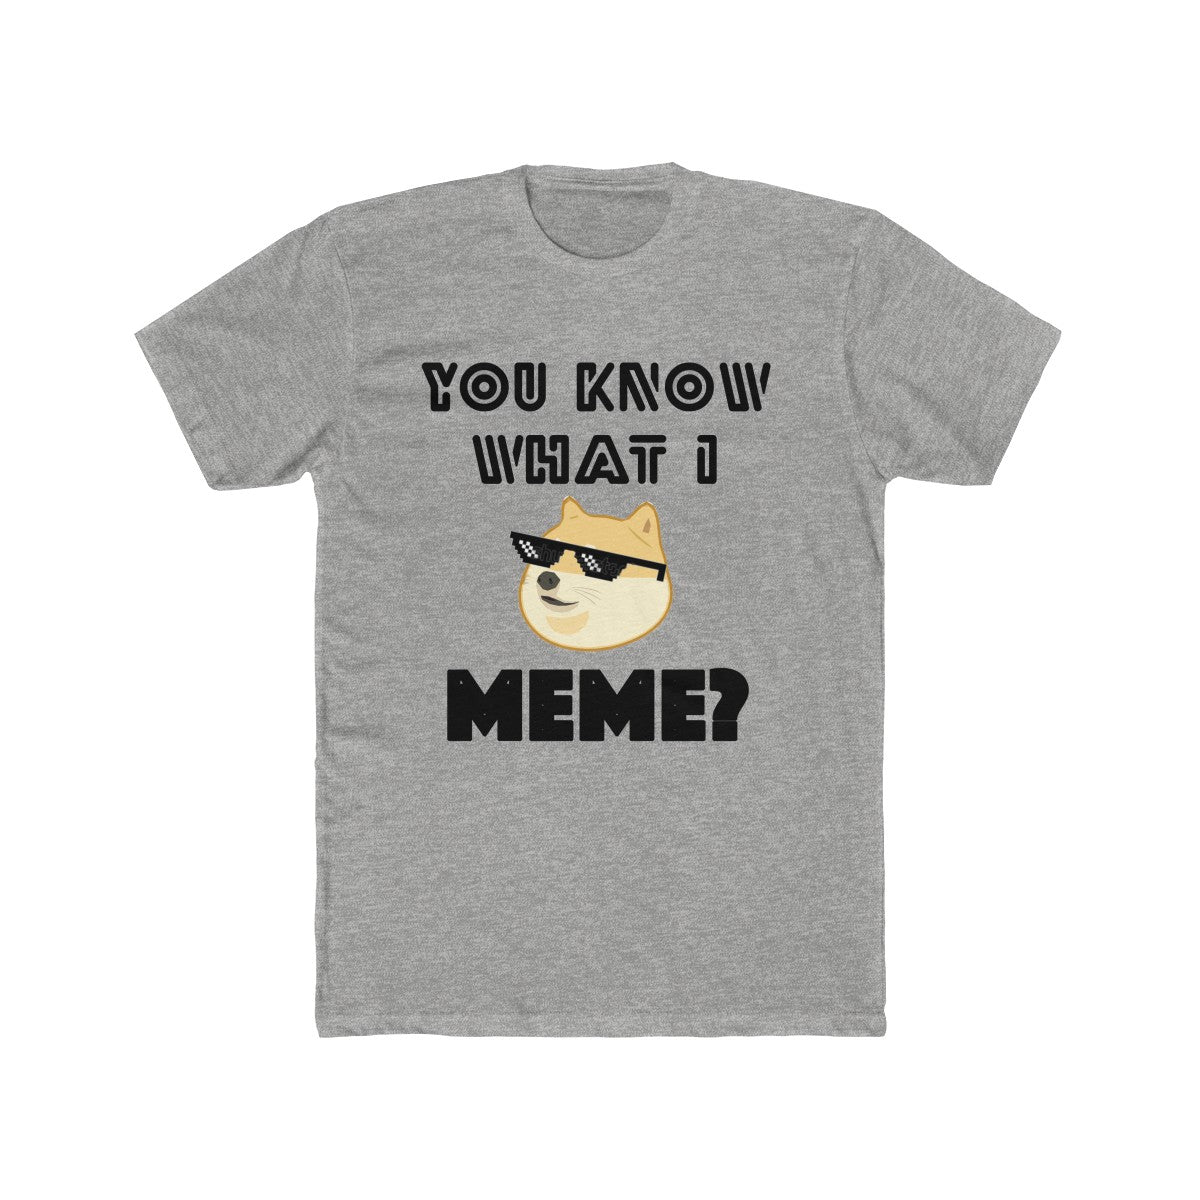 You Know What I MEME? Funny Doge Meme